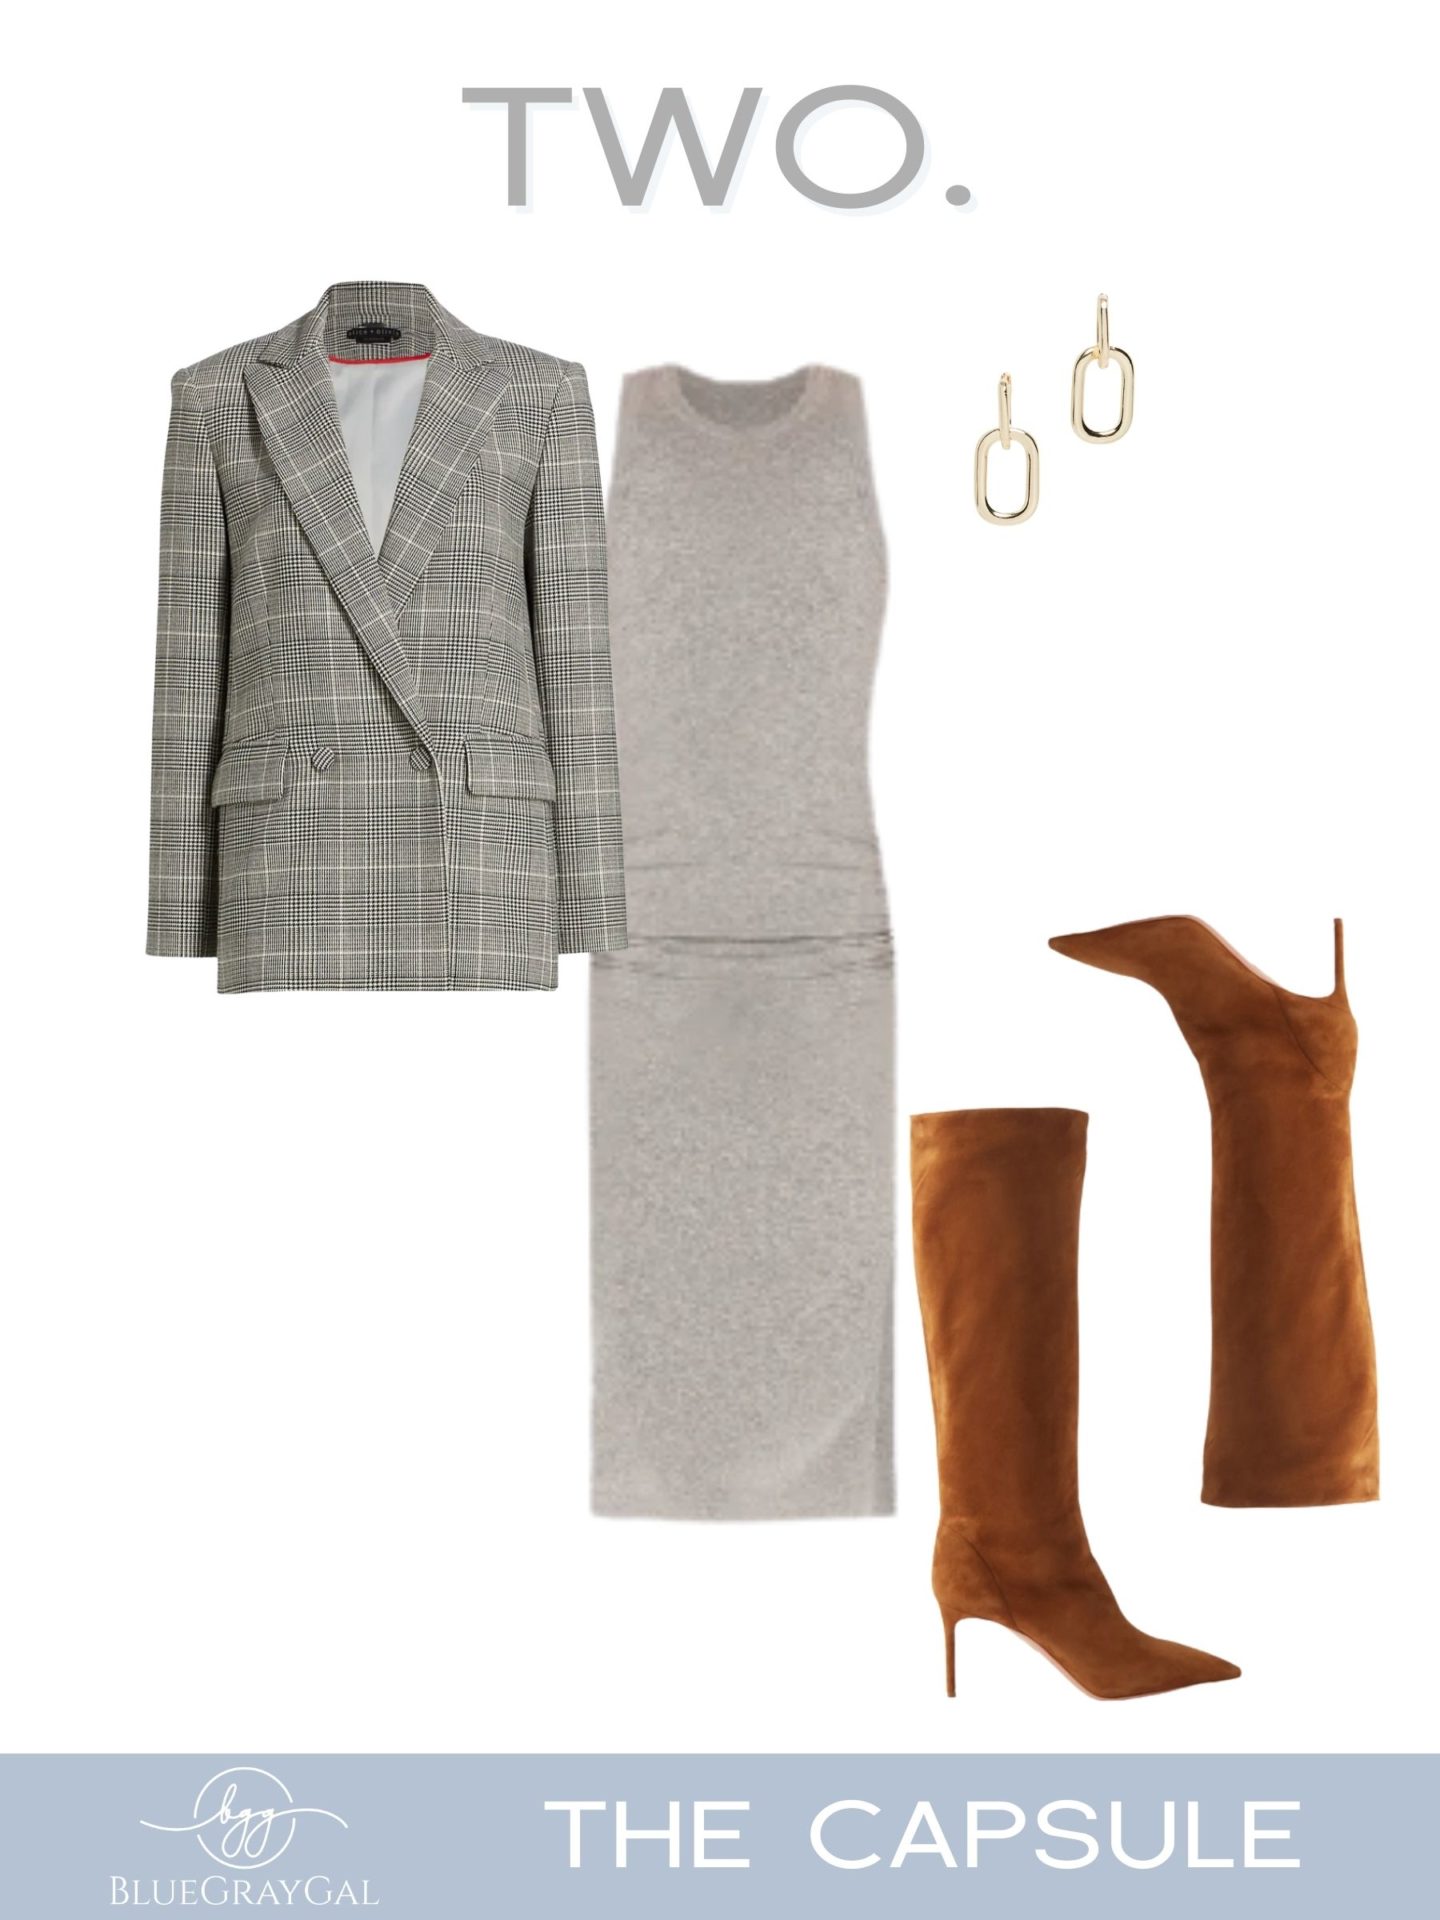 A travel capsule wardrobe outfit idea with fall boots, blazer and sleeveless dress.